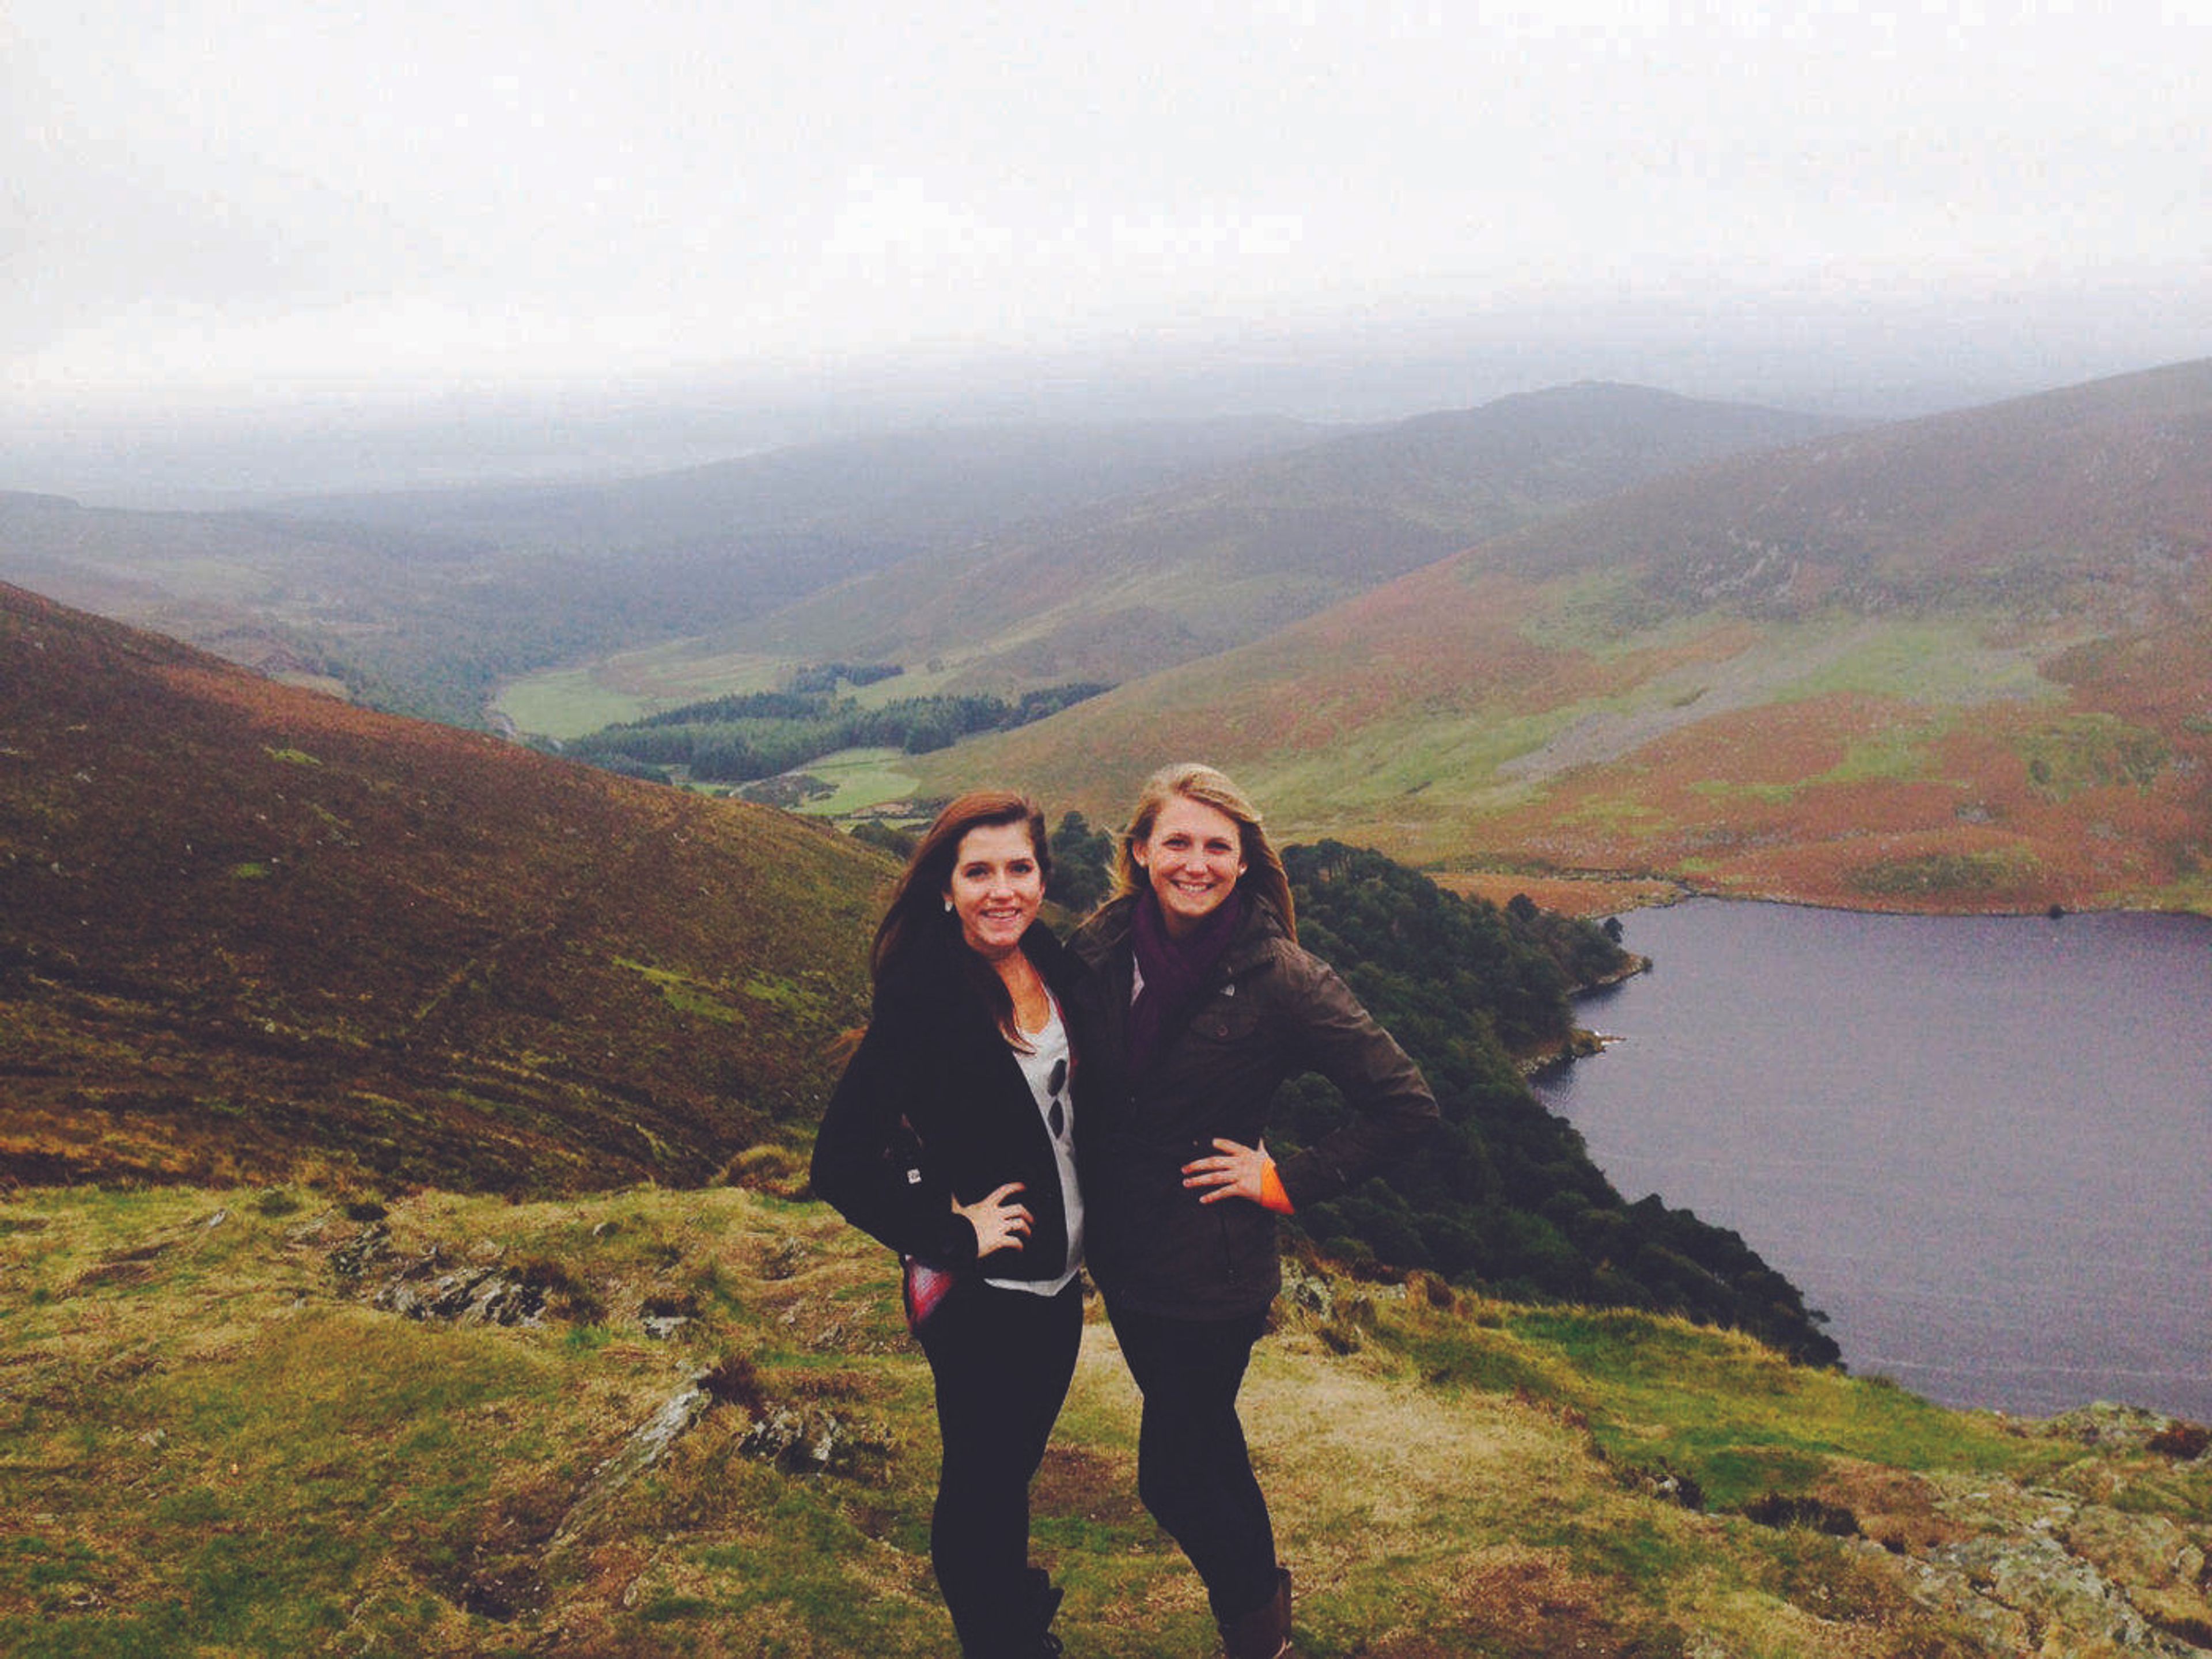 Marketing student spends a semester studying in Dublin